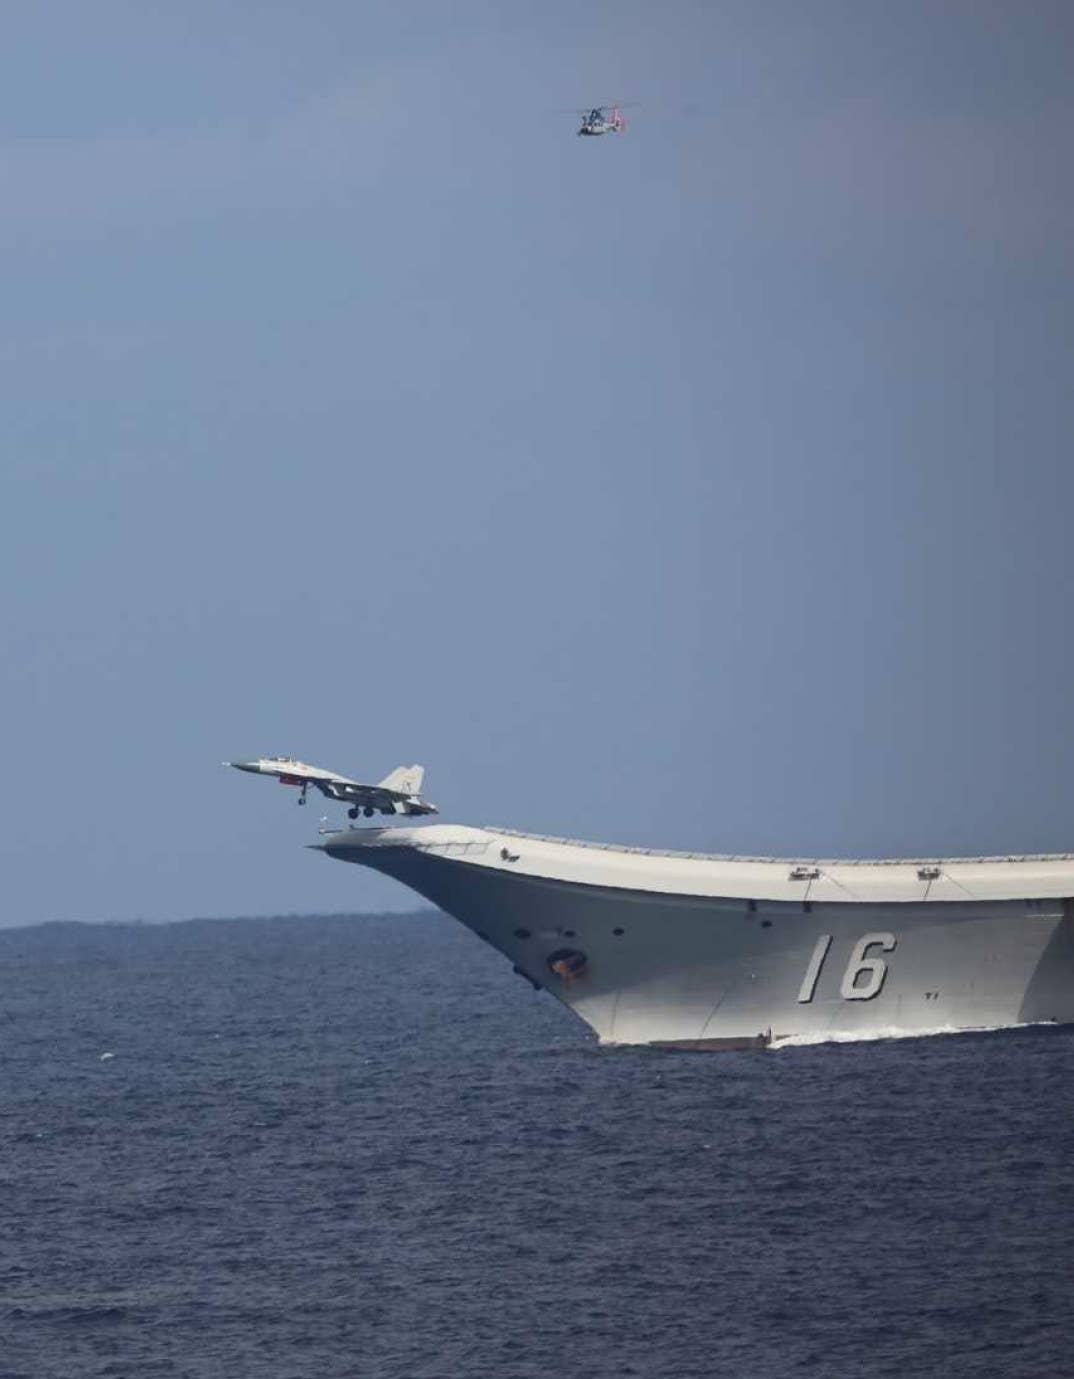 message-editor%2F1640886409169-j-15-z-9-china-carrier.jpg